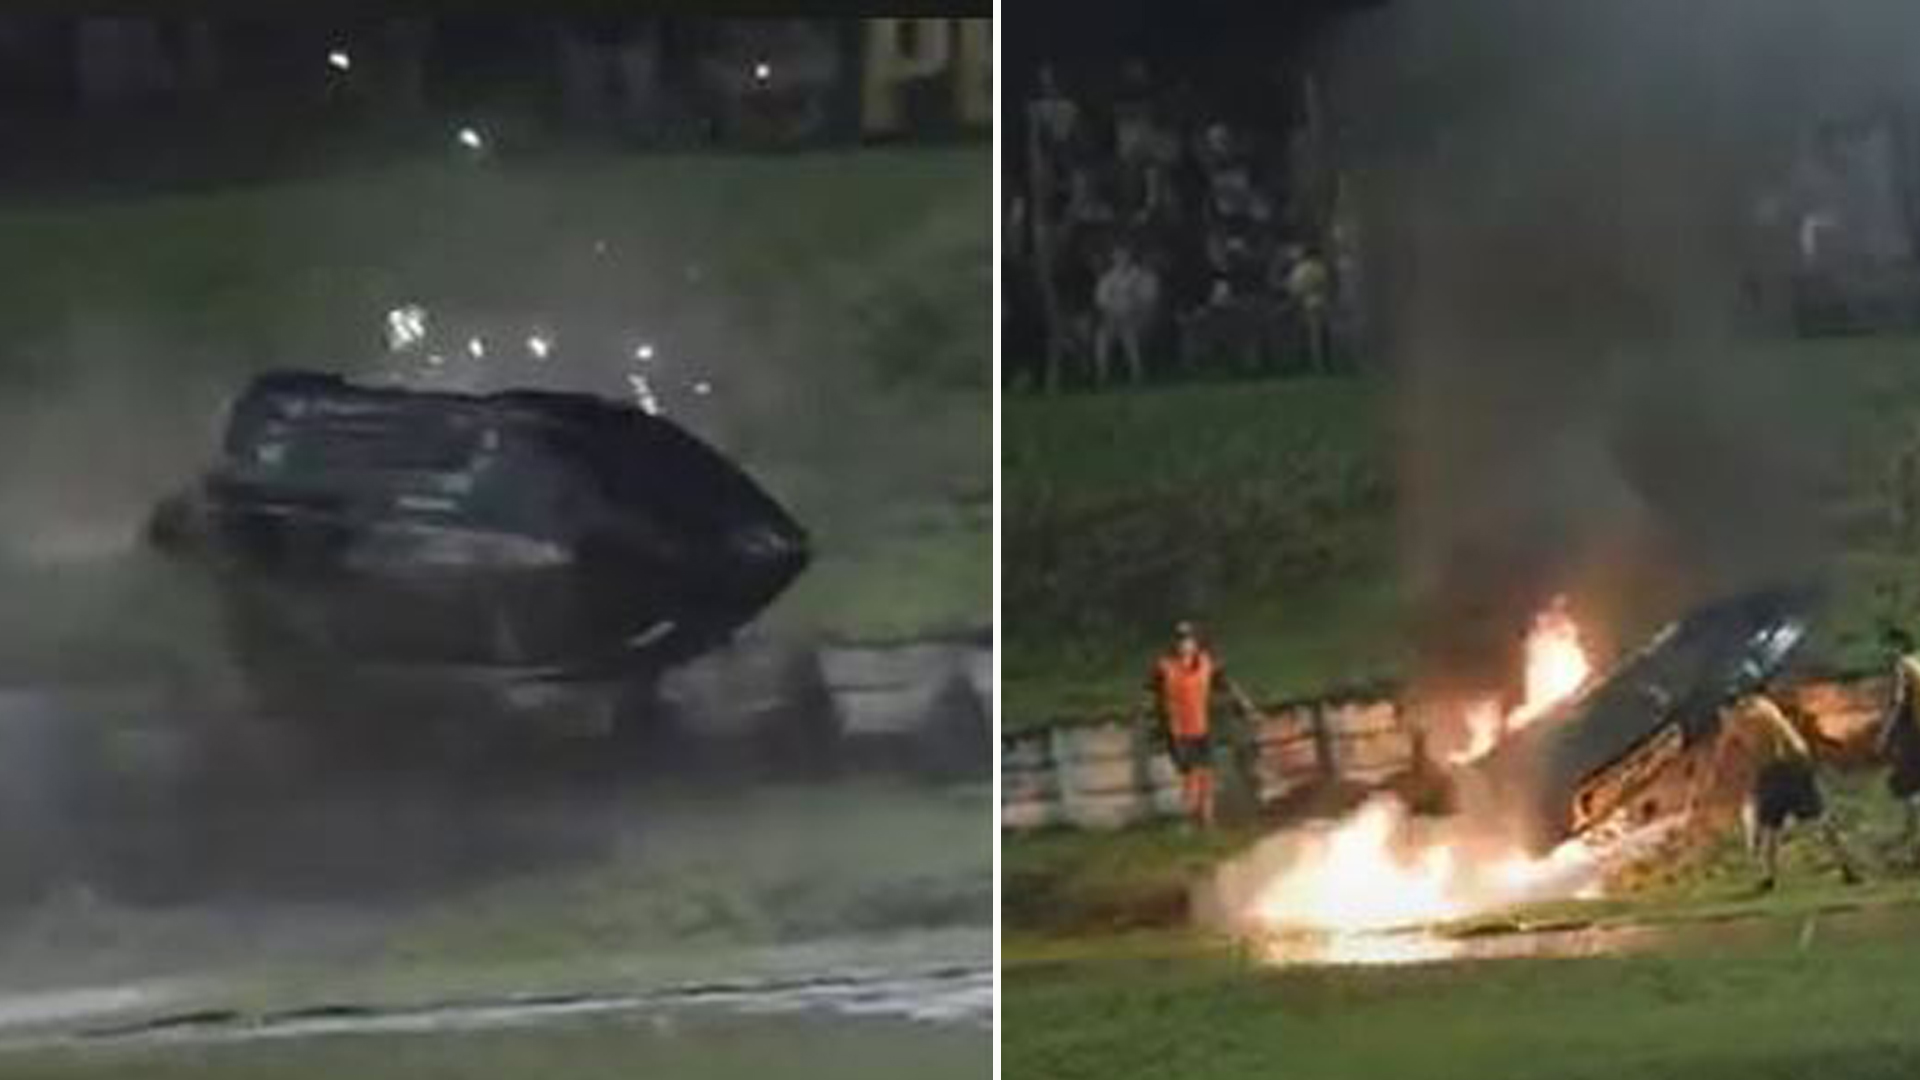 Terrifying moment 18-year-old racer crashes 590-horsepower superboat at high speed as it flips and bursts into flames